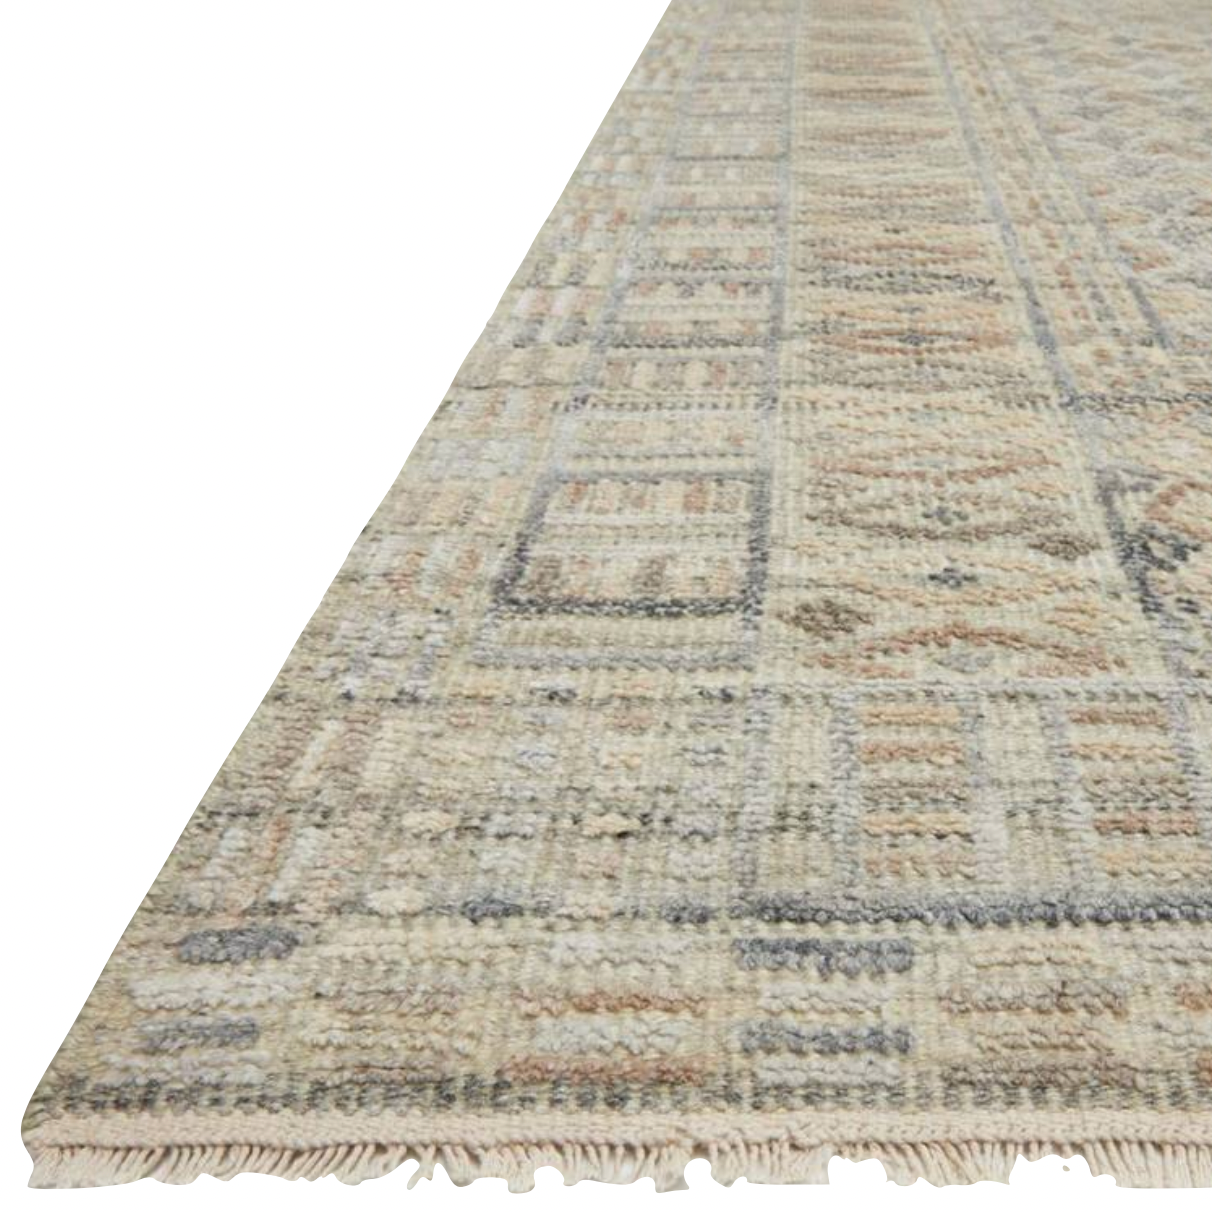 Timeless yet modern, the Nola Sand / Beige Area Rug is hand-knotted in India of viscose, cotton, wool and other fibers. The tonal collection showcases an elevated texture, accentuating the pattern in every piece.  Hand Knotted 66% Viscose | 25% Wool | 7% Cotton | 2% Other Fiber Pile NOL-03 Sand / Beige